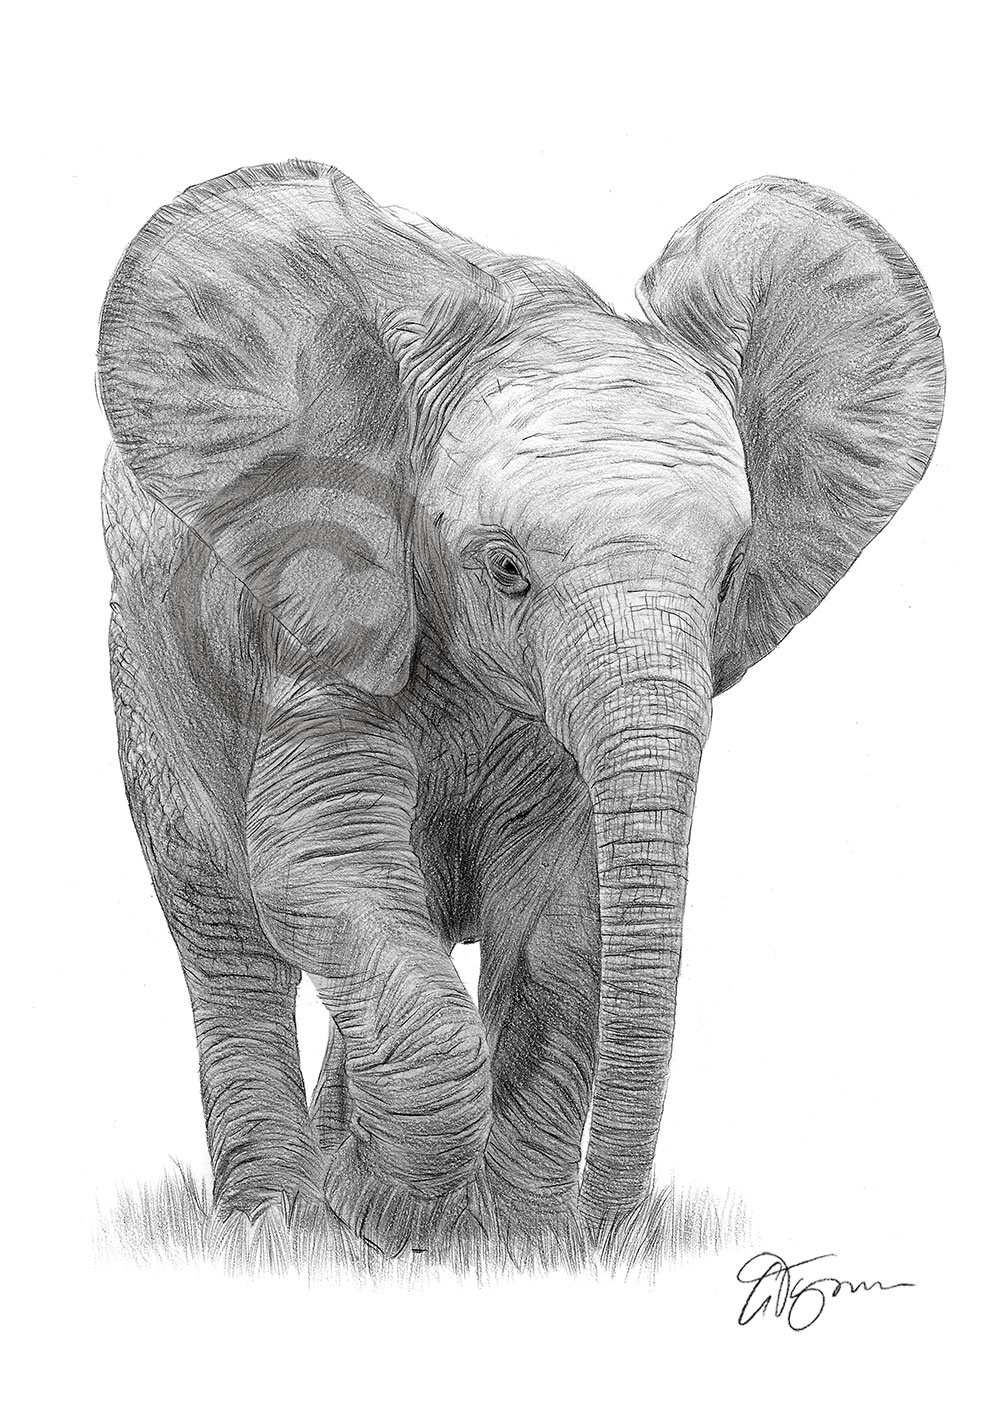 Pencil drawing of a baby elephant by artist Gary Tymon